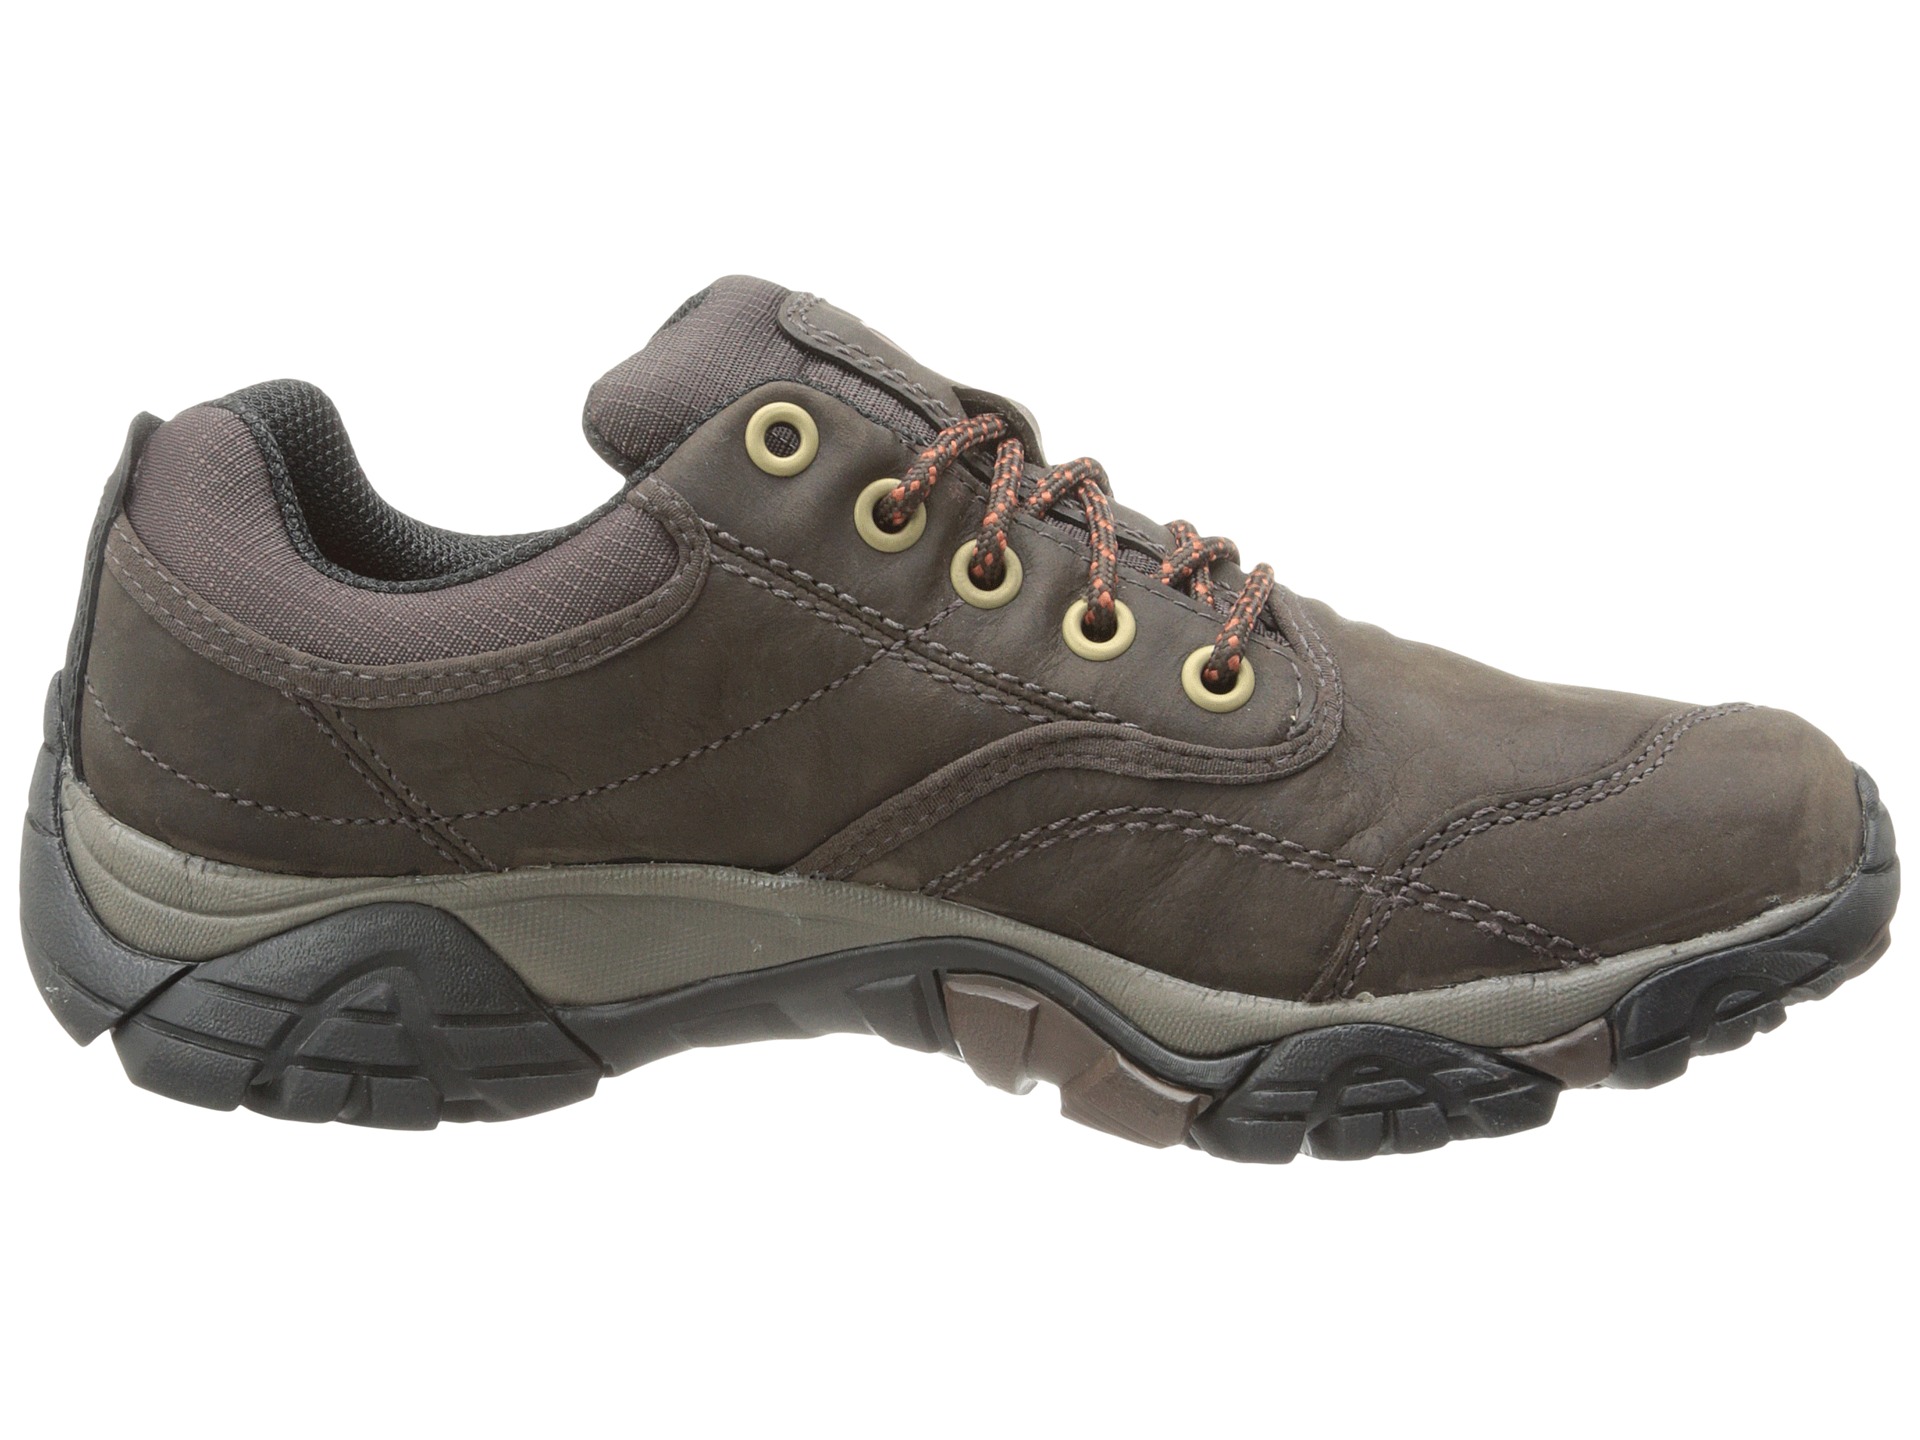 Merrell Moab Rover Waterproof - Zappos Free Shipping BOTH Ways